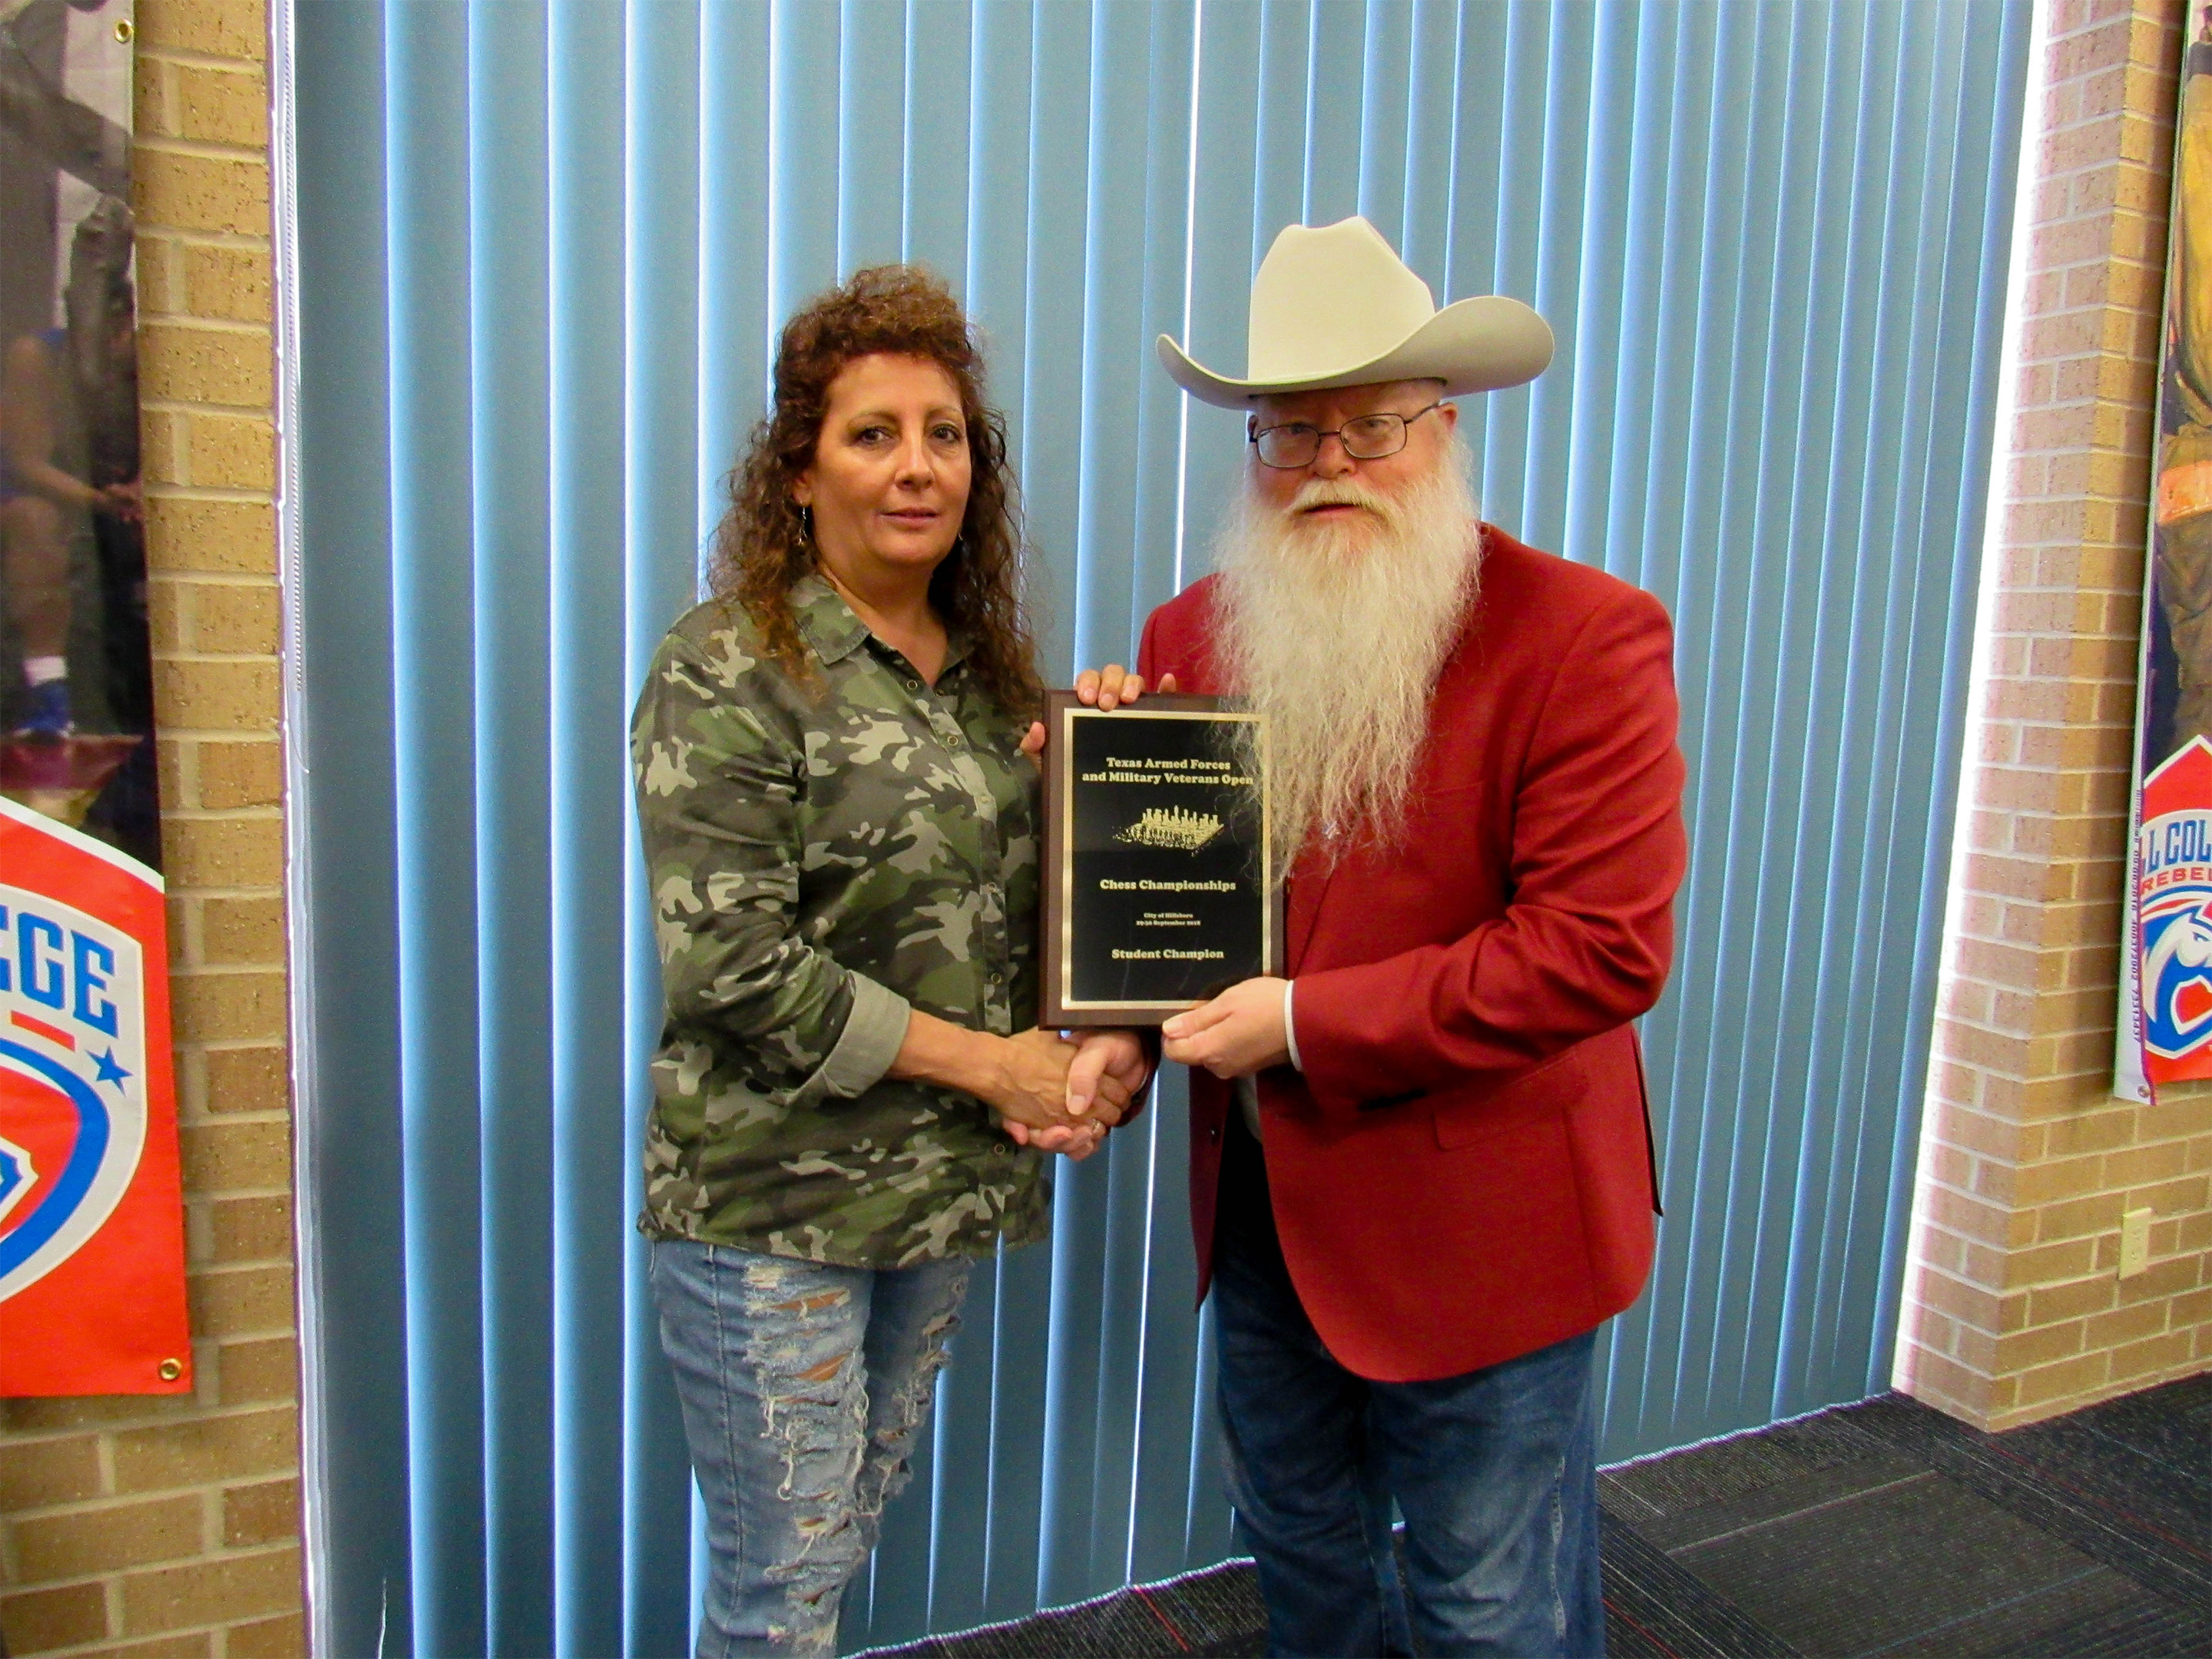 Sheryl McBroom (left in the photo) is awarded the title of Texas Armed Forces Student Champion by Chief Organizer Jim Hollingsworth (right).  Photo by Clarese Roberts.